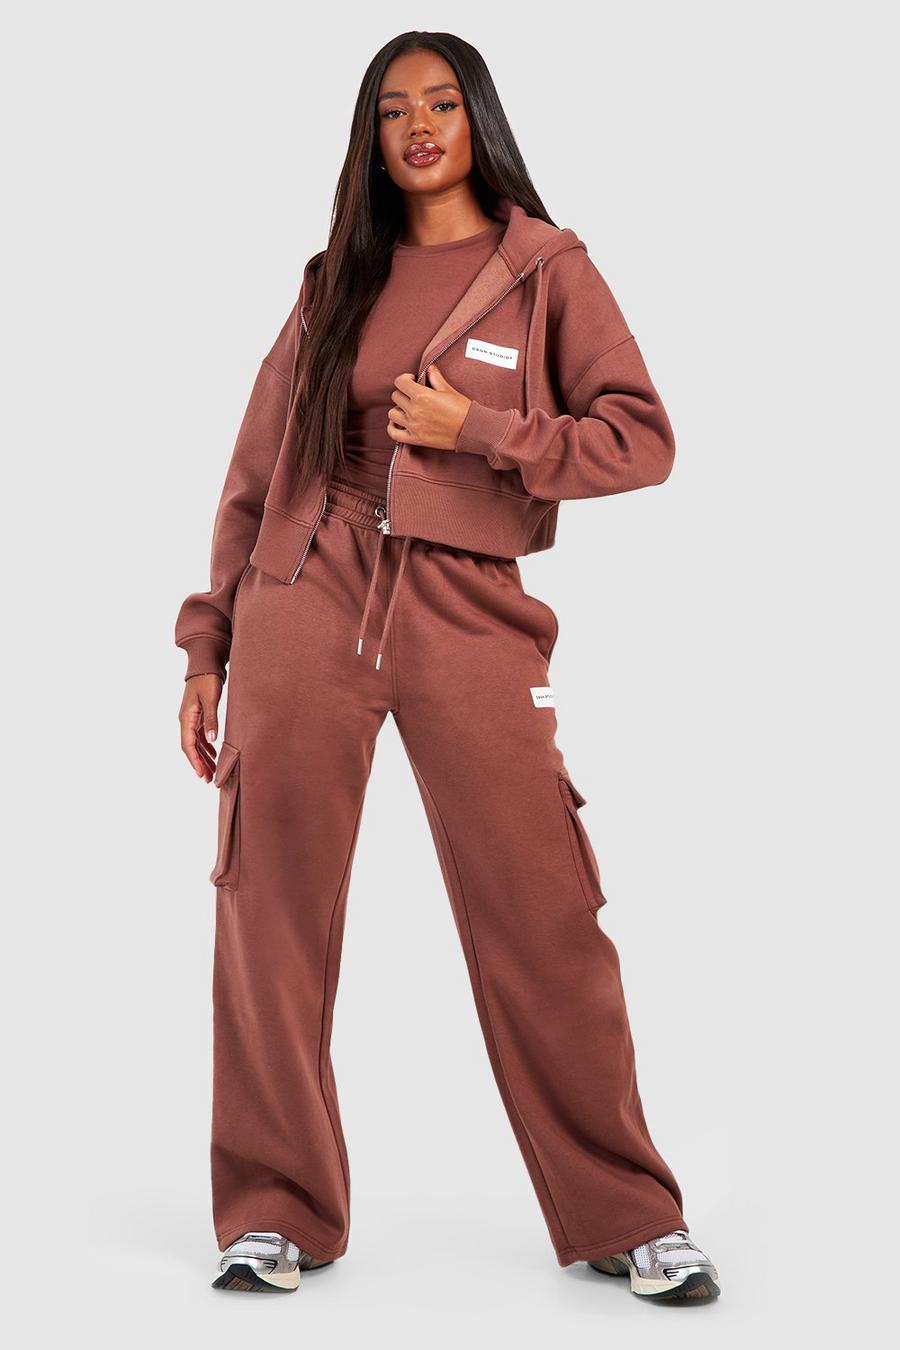 Womens Lounge Wear Sets Casual Sweatsuits Full Tracksuit Set Two Piece  Outfits Hoodies Pullover Joggers Bottom Set With Pockets